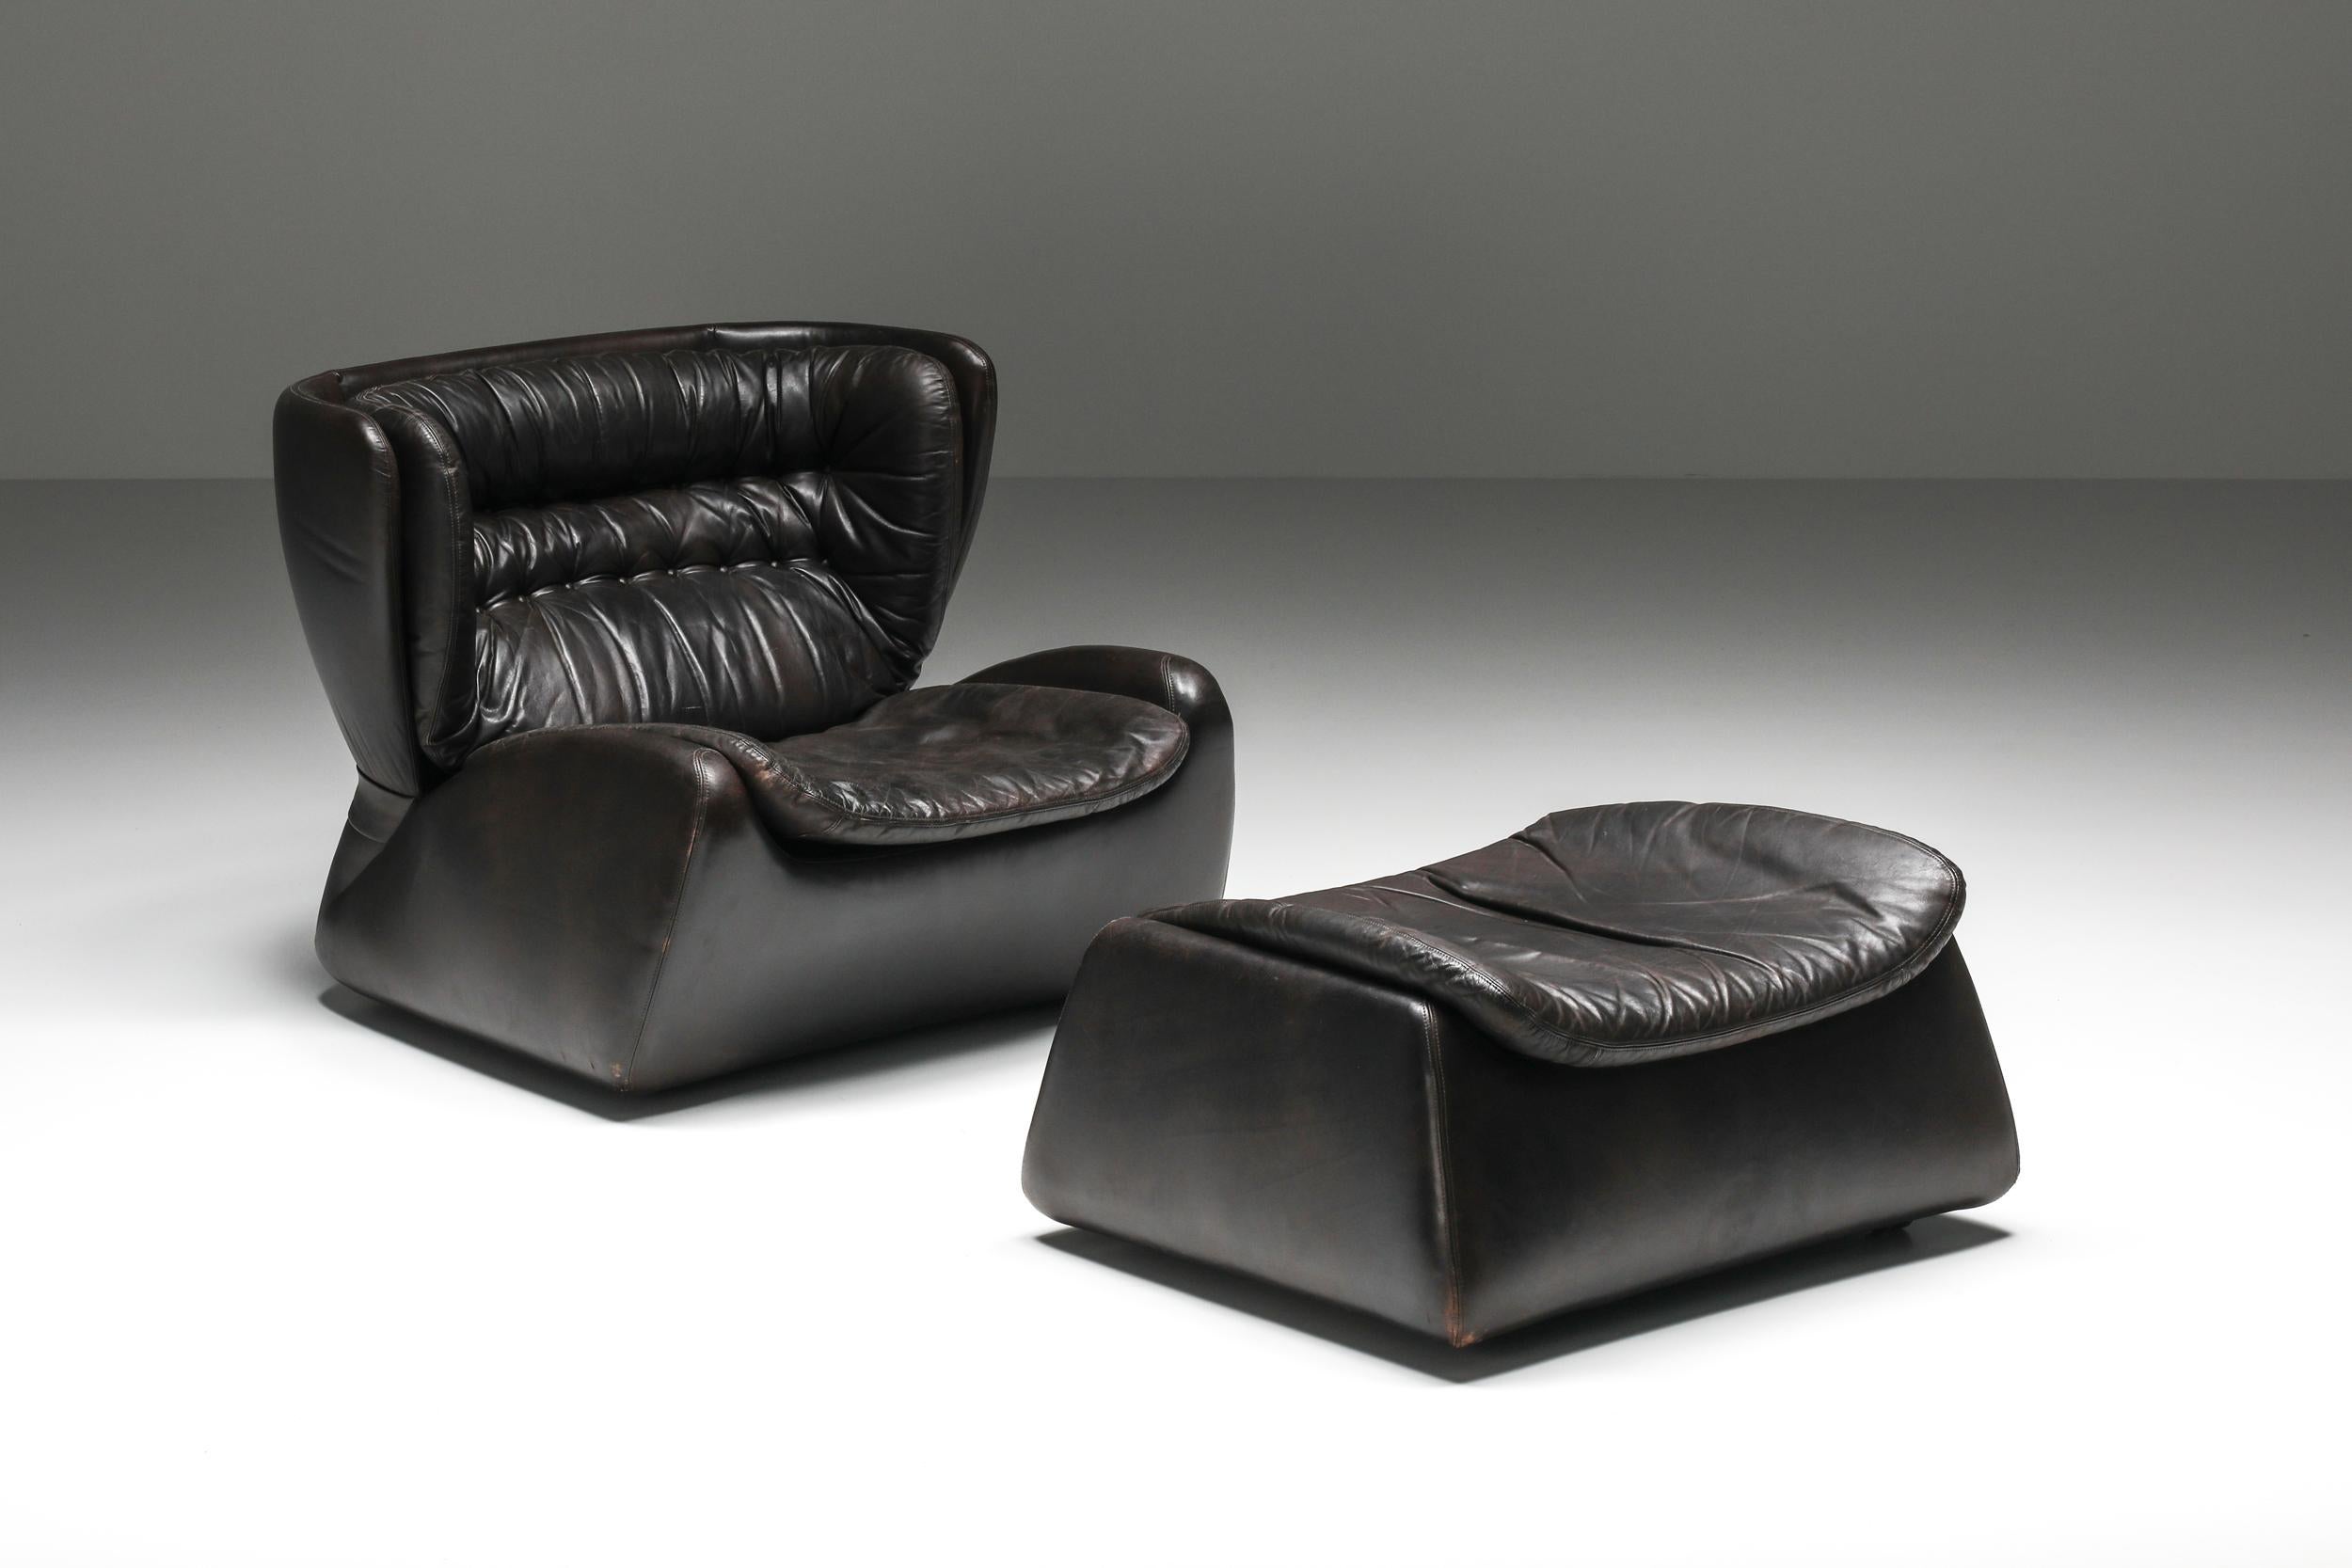 20th Century Belgian Design, Dark Brown 'Pasha' Lounge Chairs by Durlet, 1970's For Sale